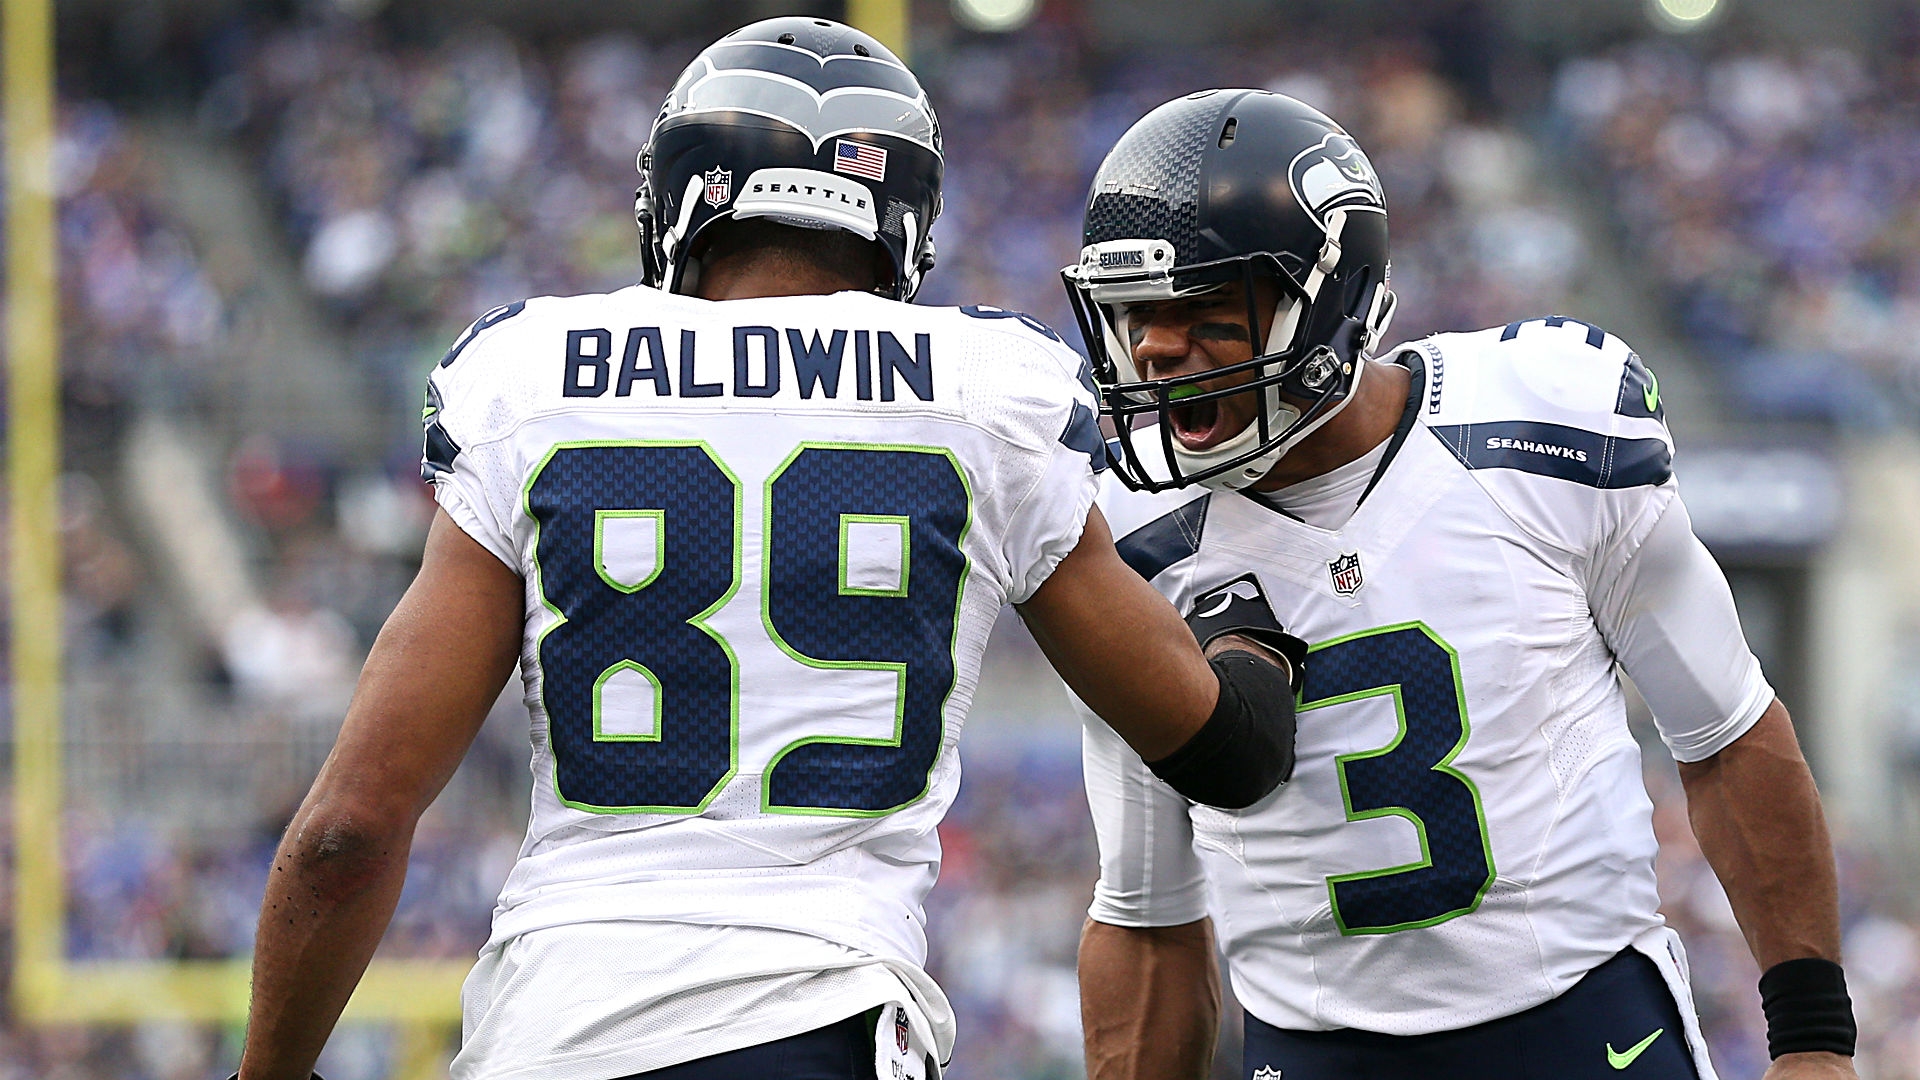 Sizzling Seahawks latest to go from losing to winning in season's second half